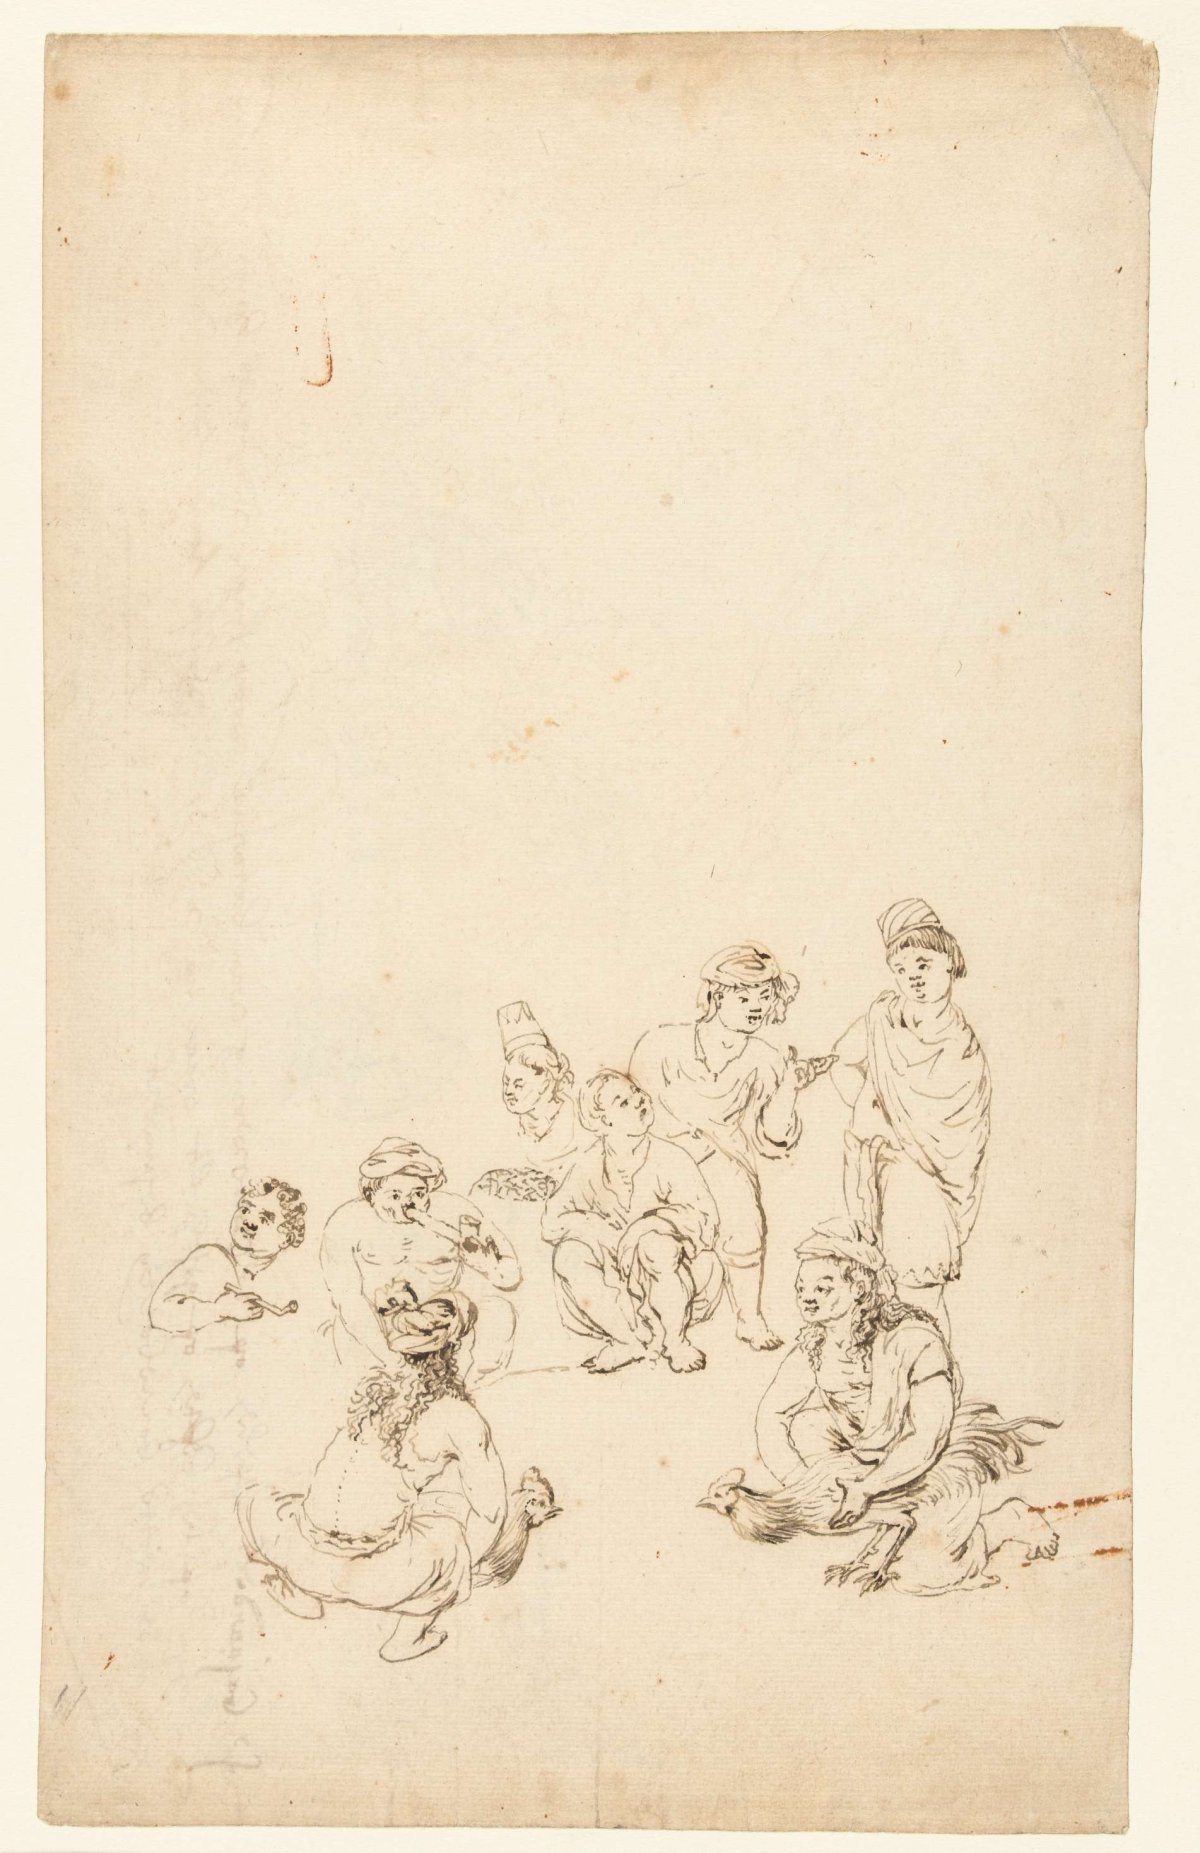 Fighting cocks with their bosses and audience, Wouter Schouten, c. 1660